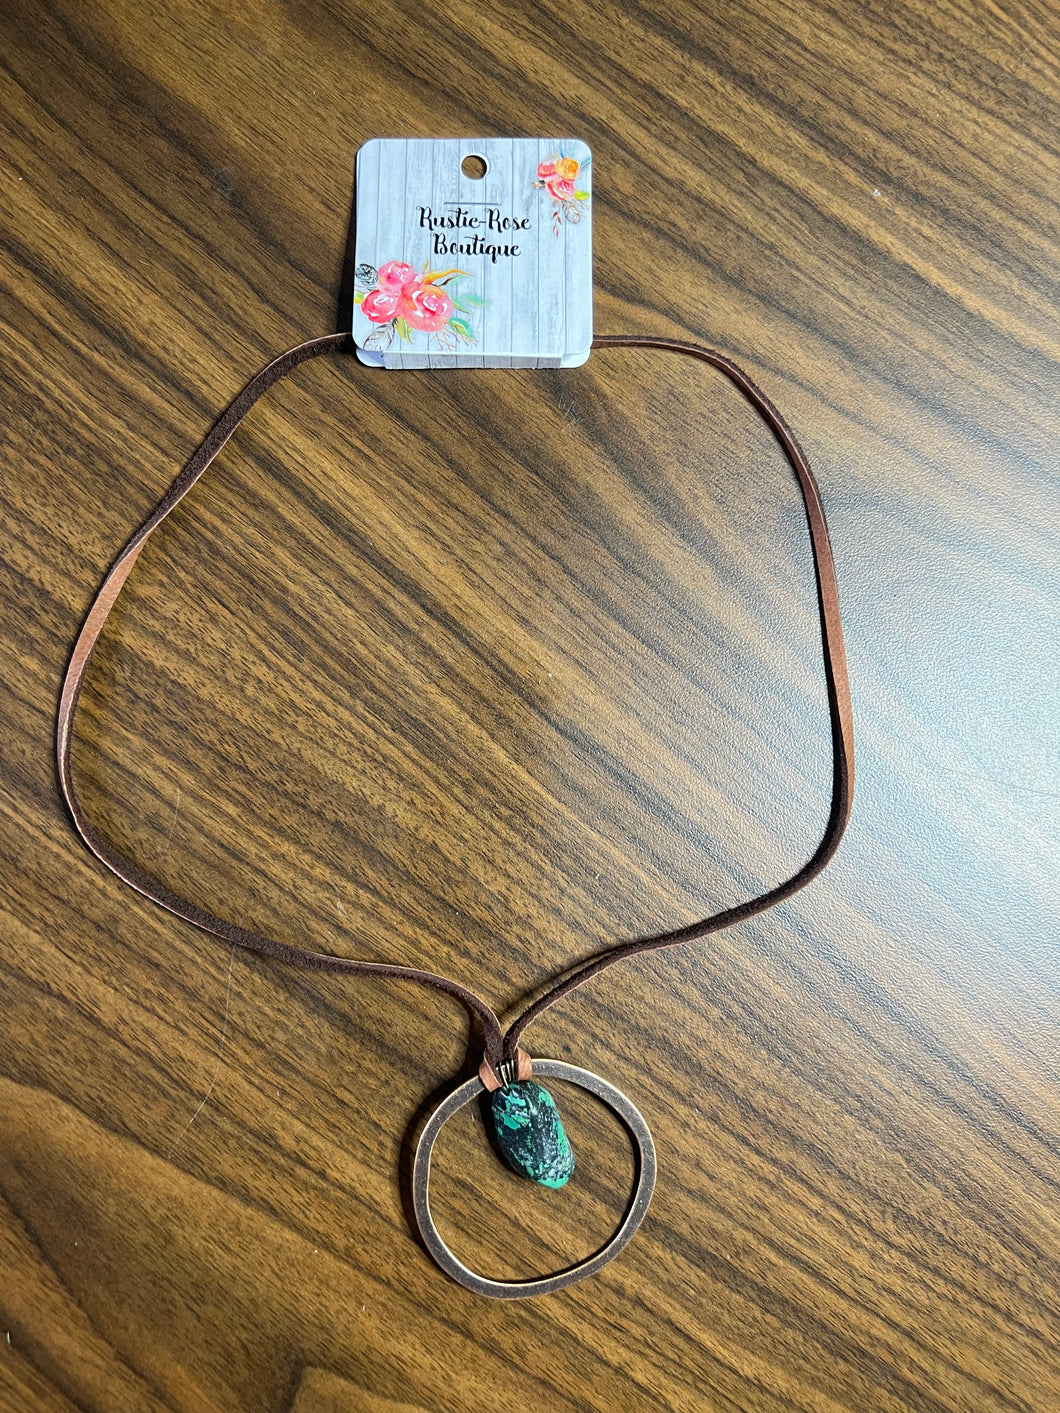 Leather Cord Necklace with Antique Gold Hoop and Turquoise